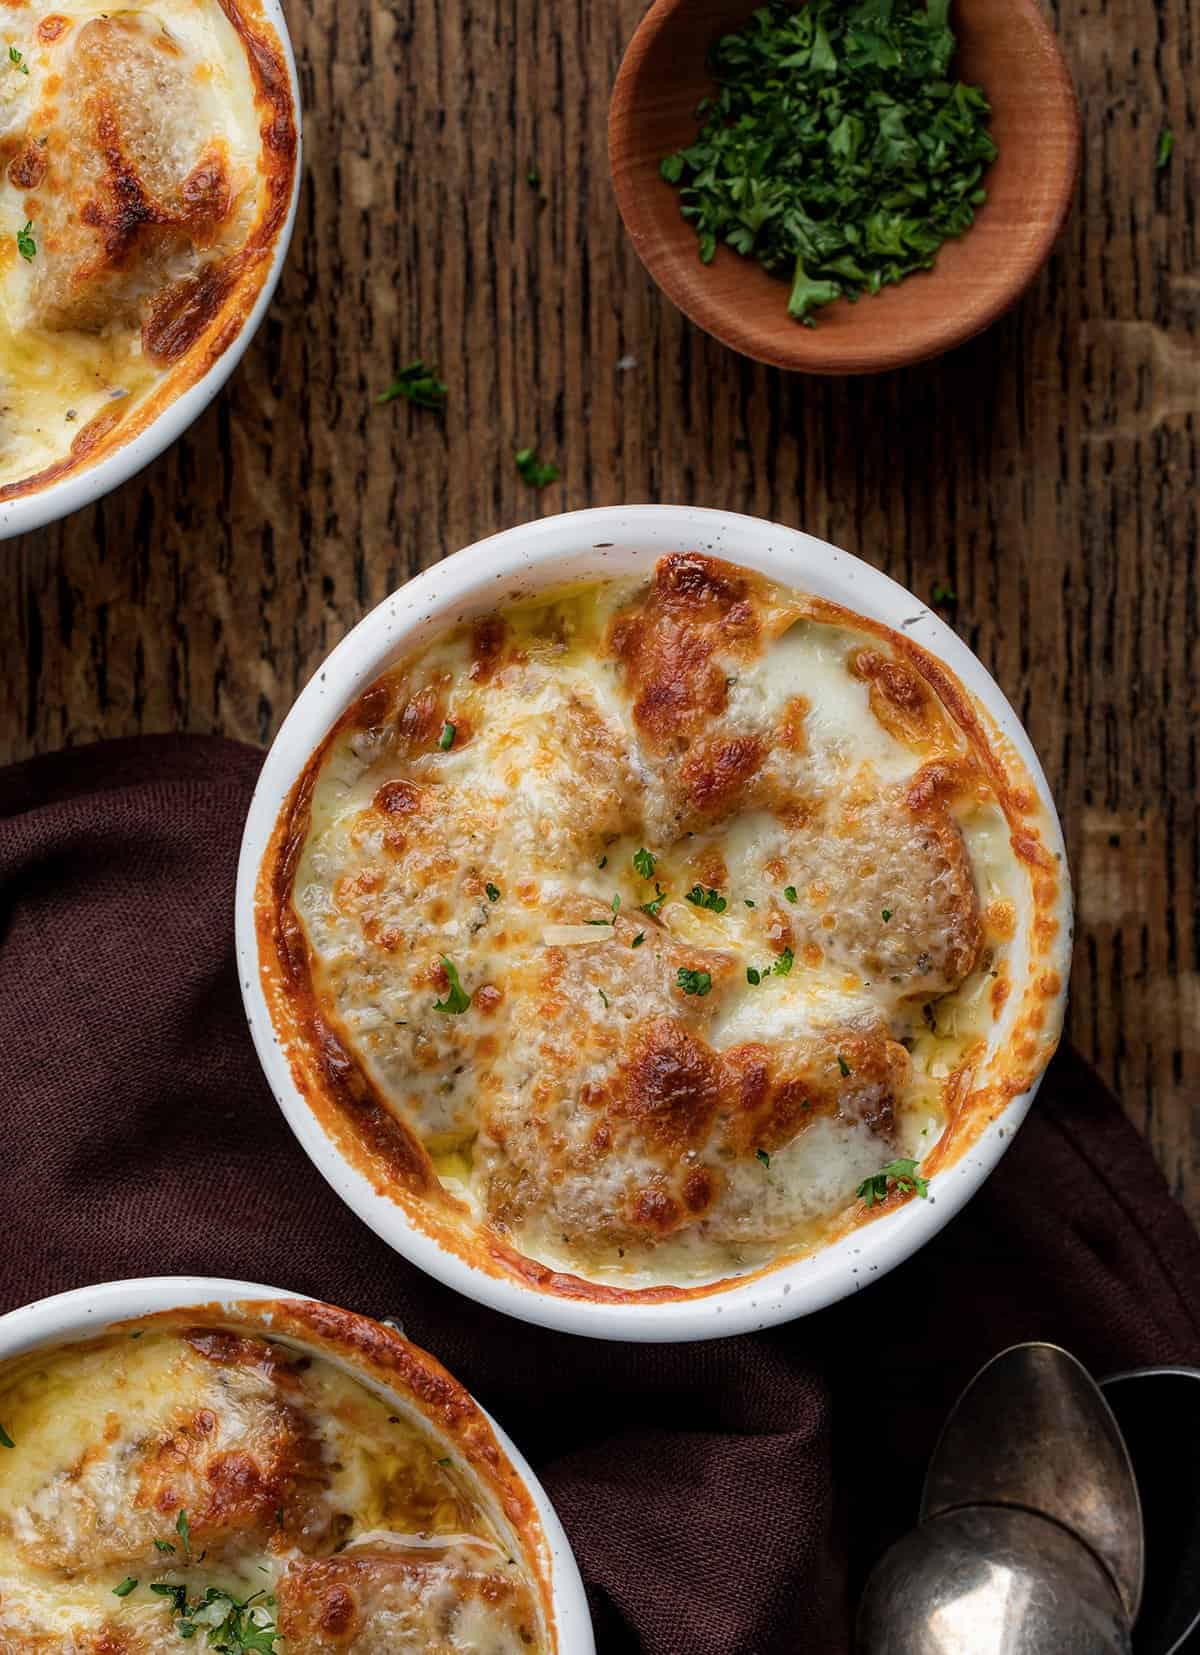 Bowls of Easy French Onion Soup from Overhead